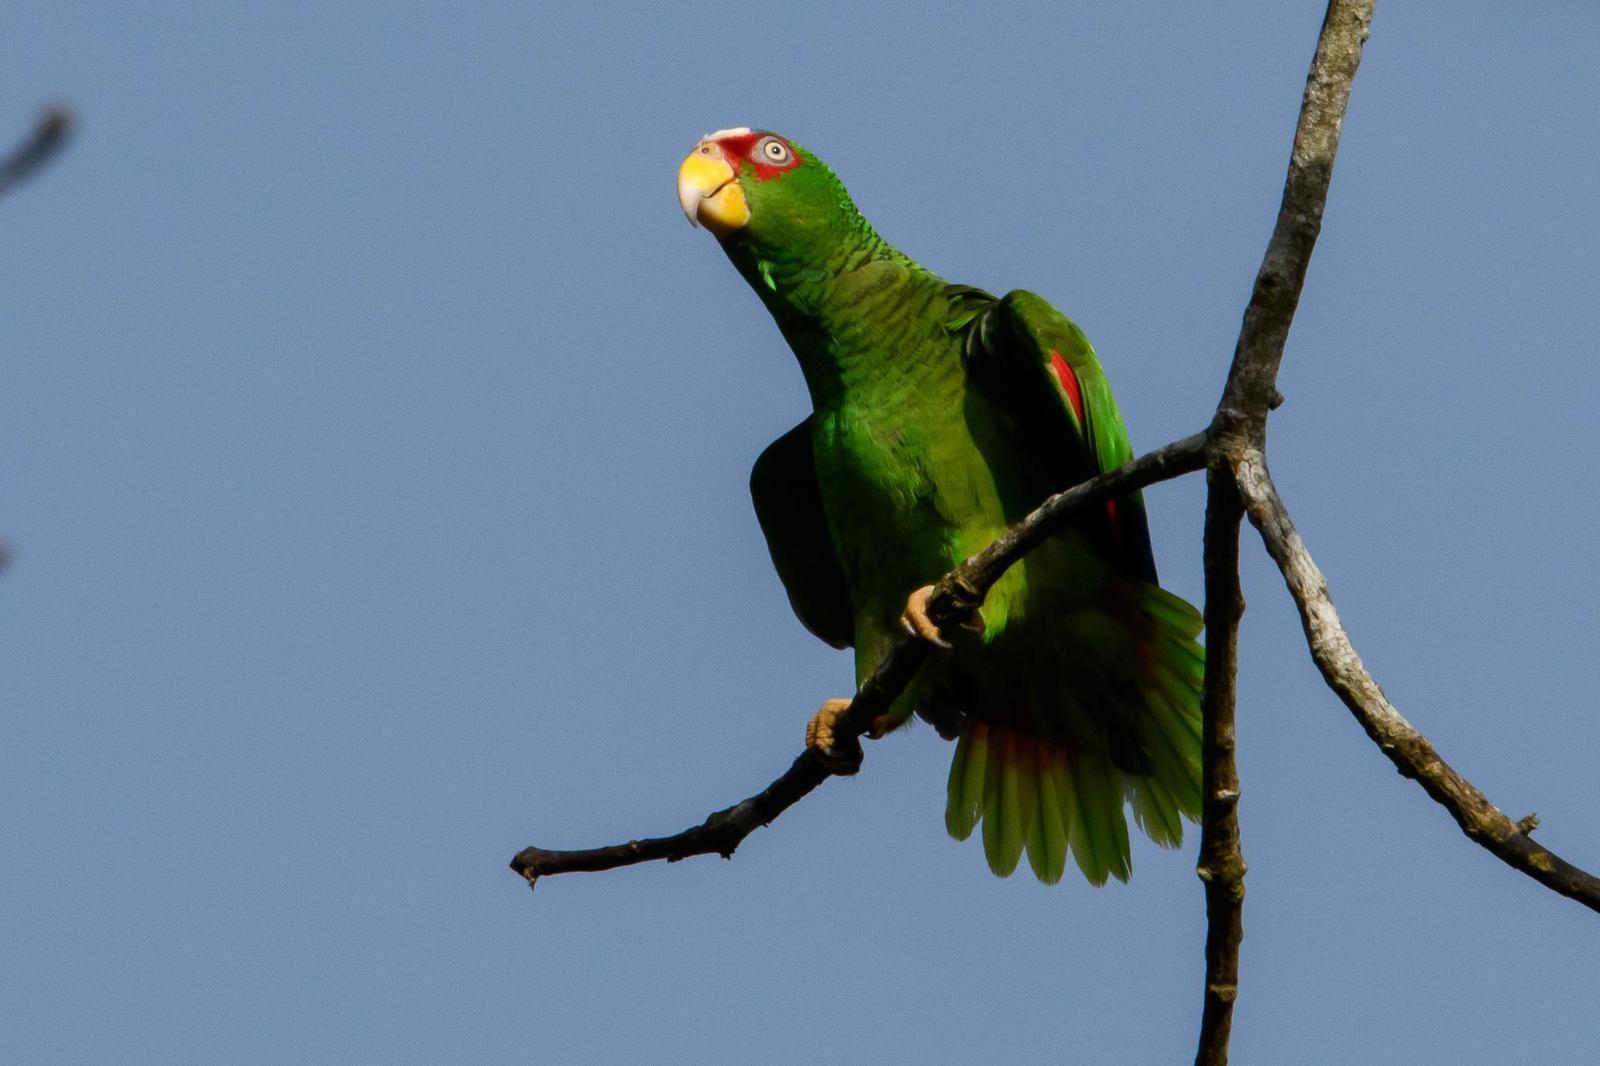 White-fronted Parrot Photo by Gerald Hoekstra